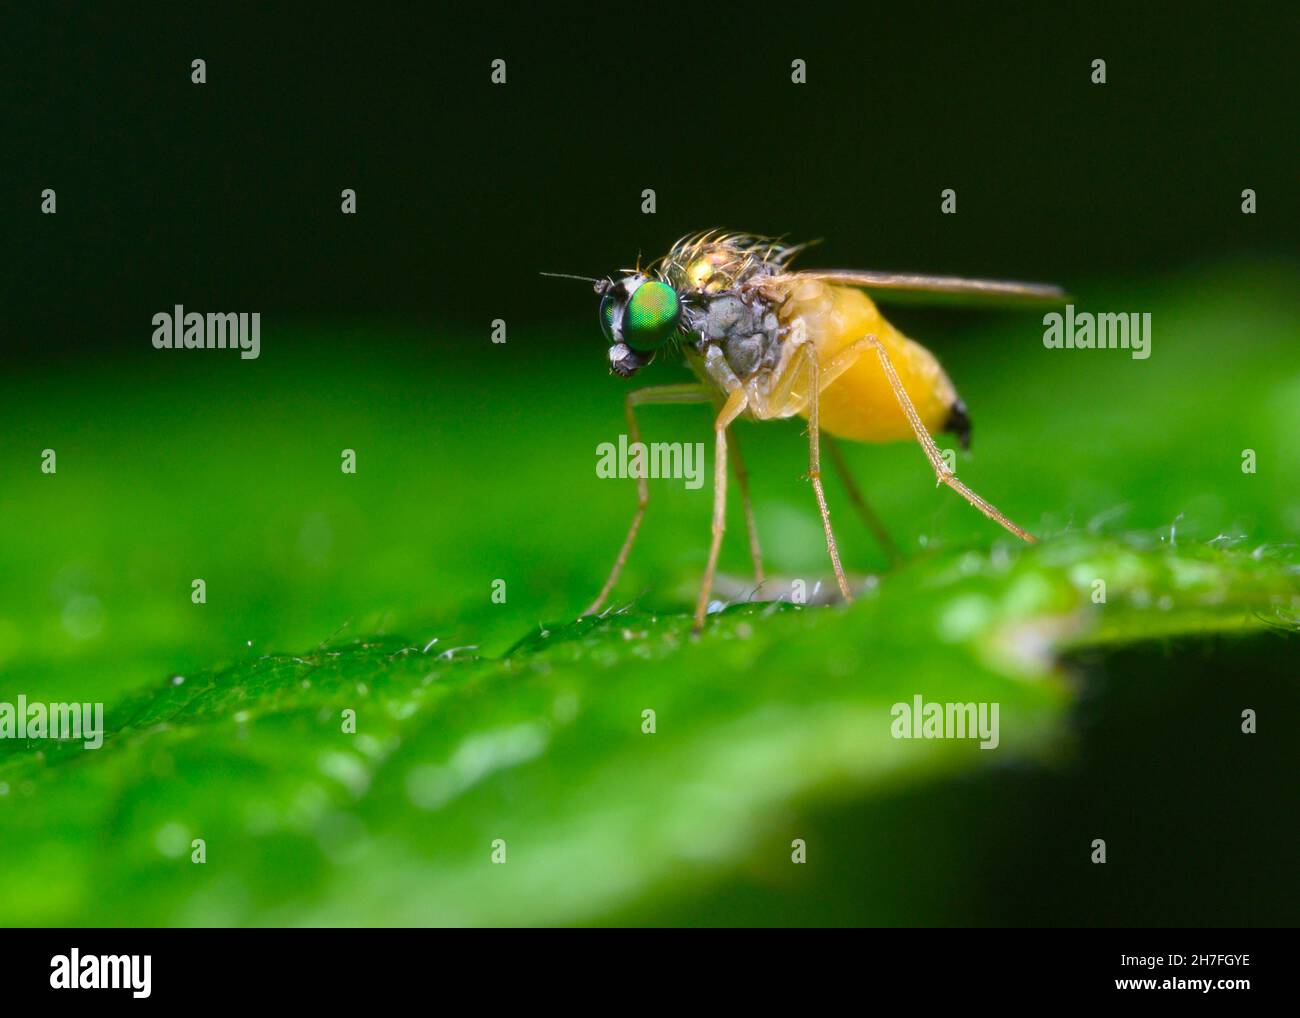 A fly with a yellow belly and bright green eyes sits on a tree leaf Stock Photo